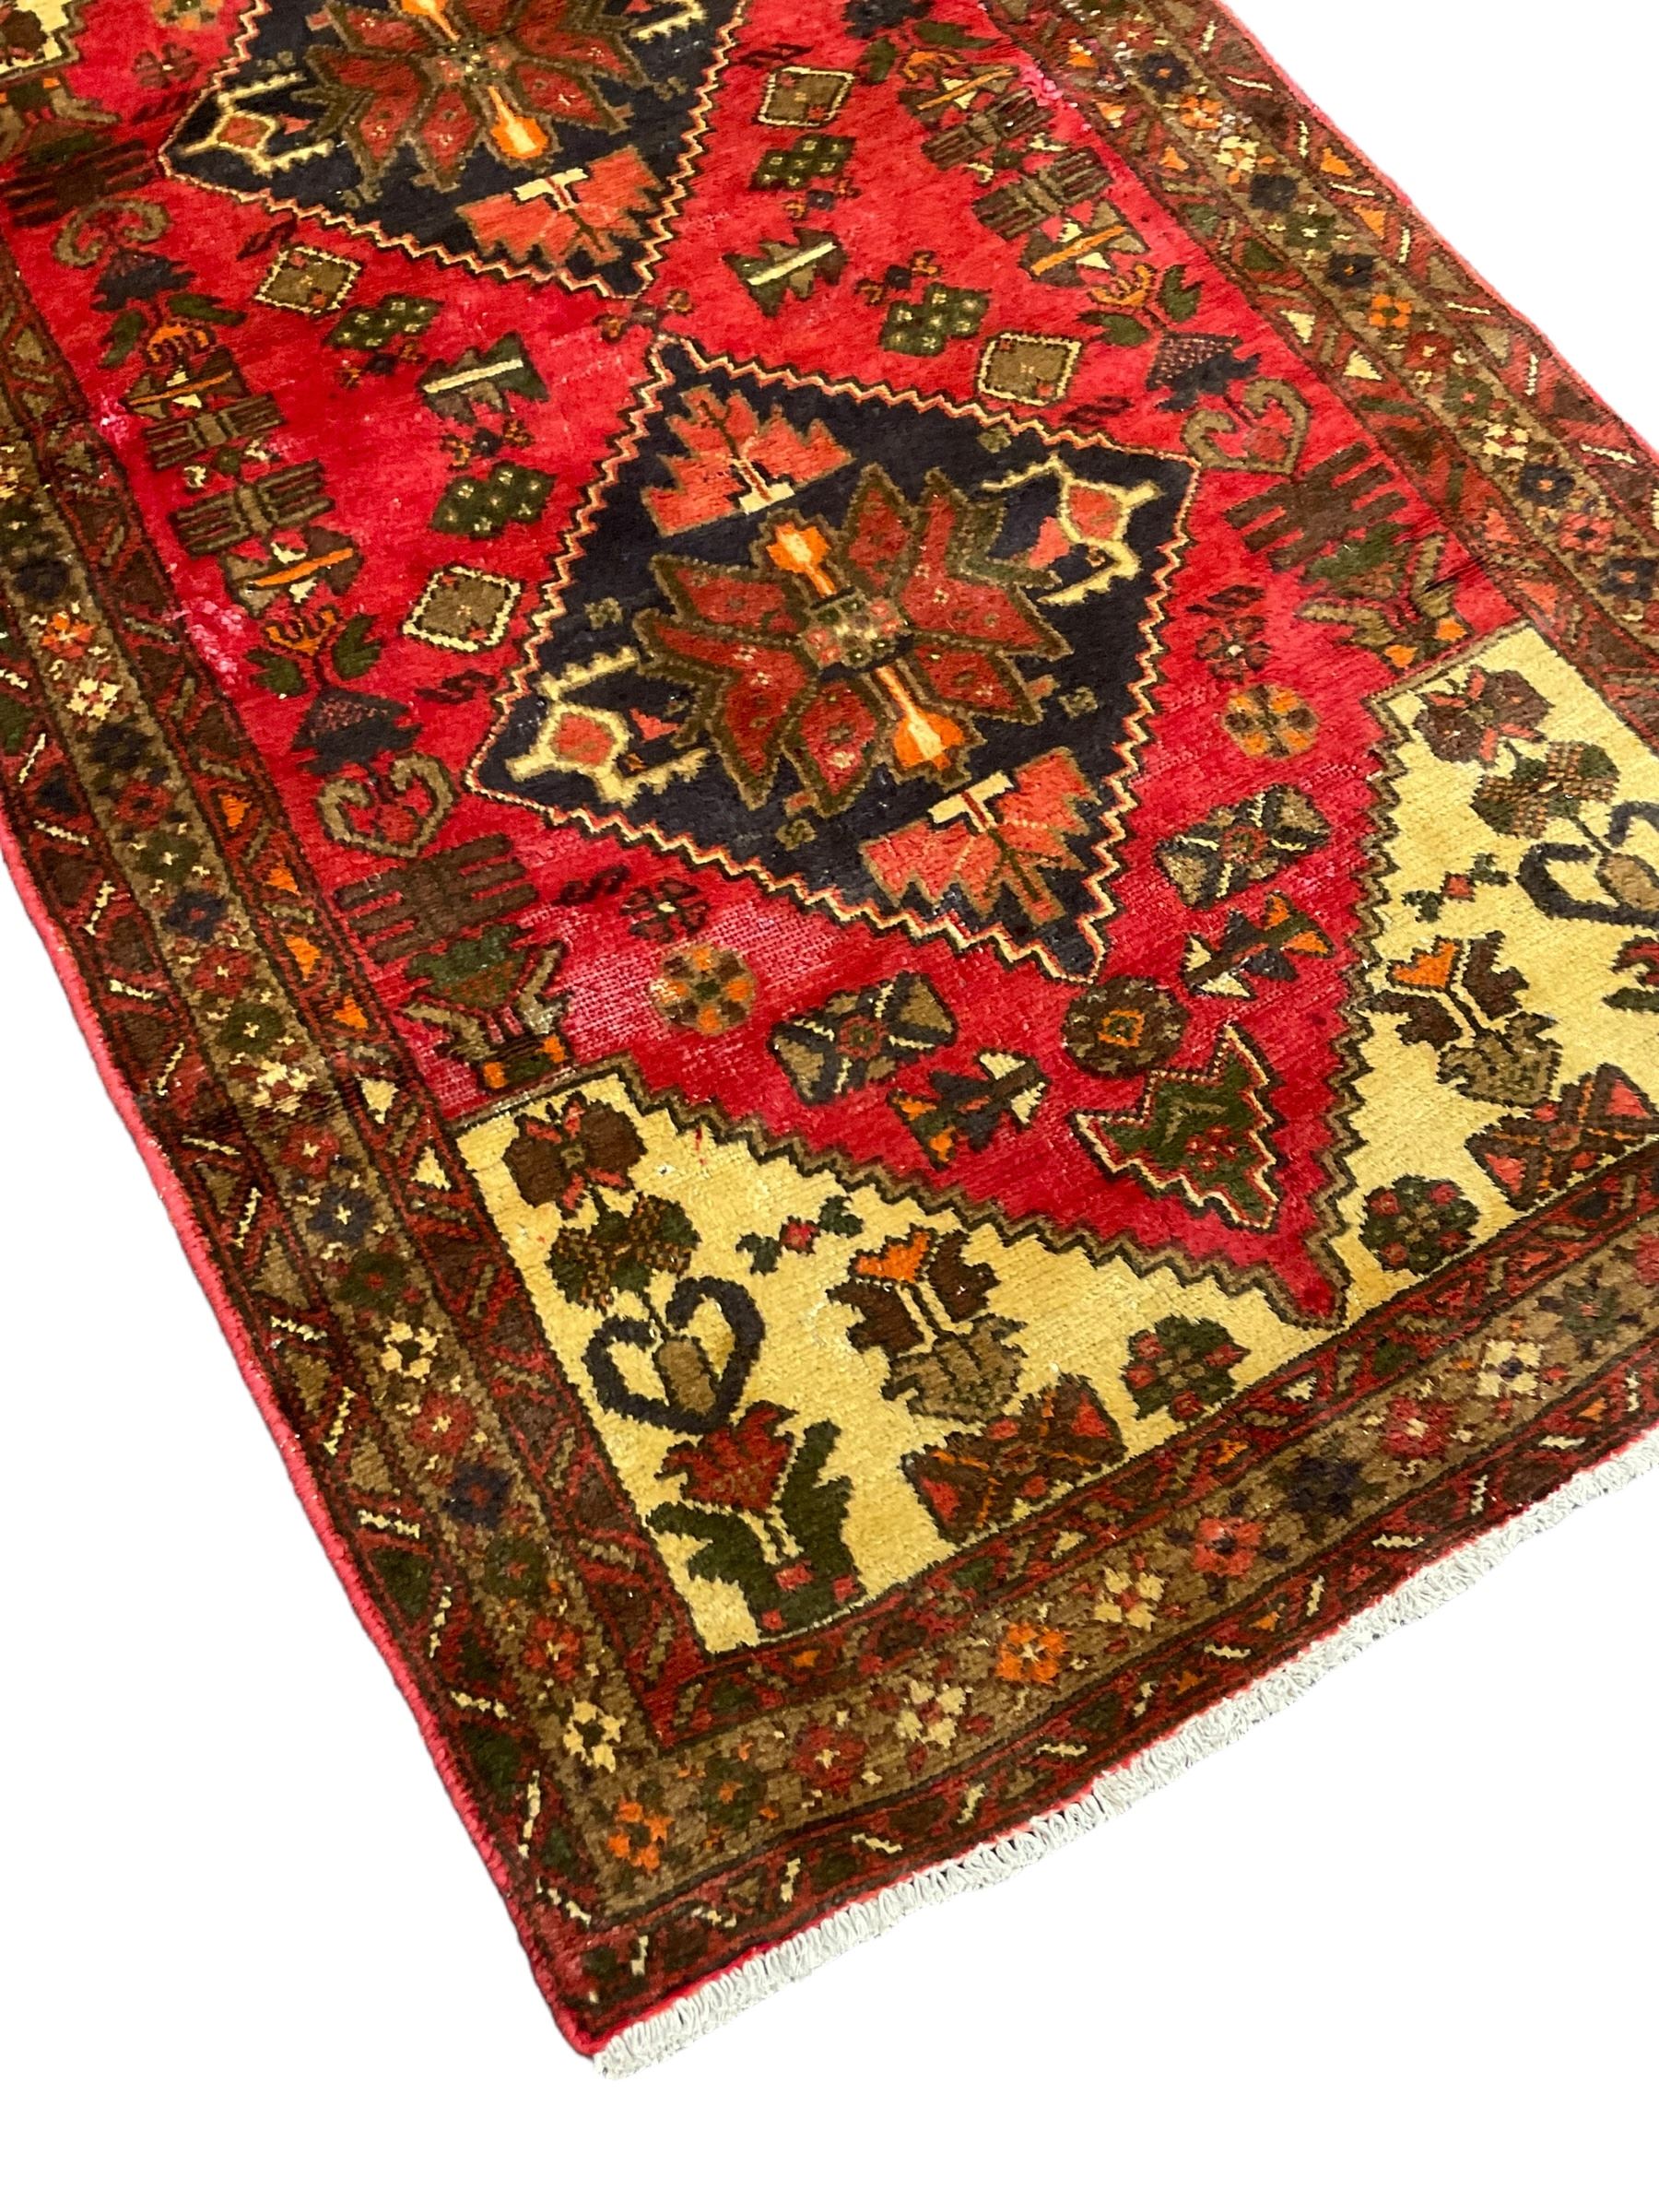 Persian Taleghan red ground rug - Image 2 of 5